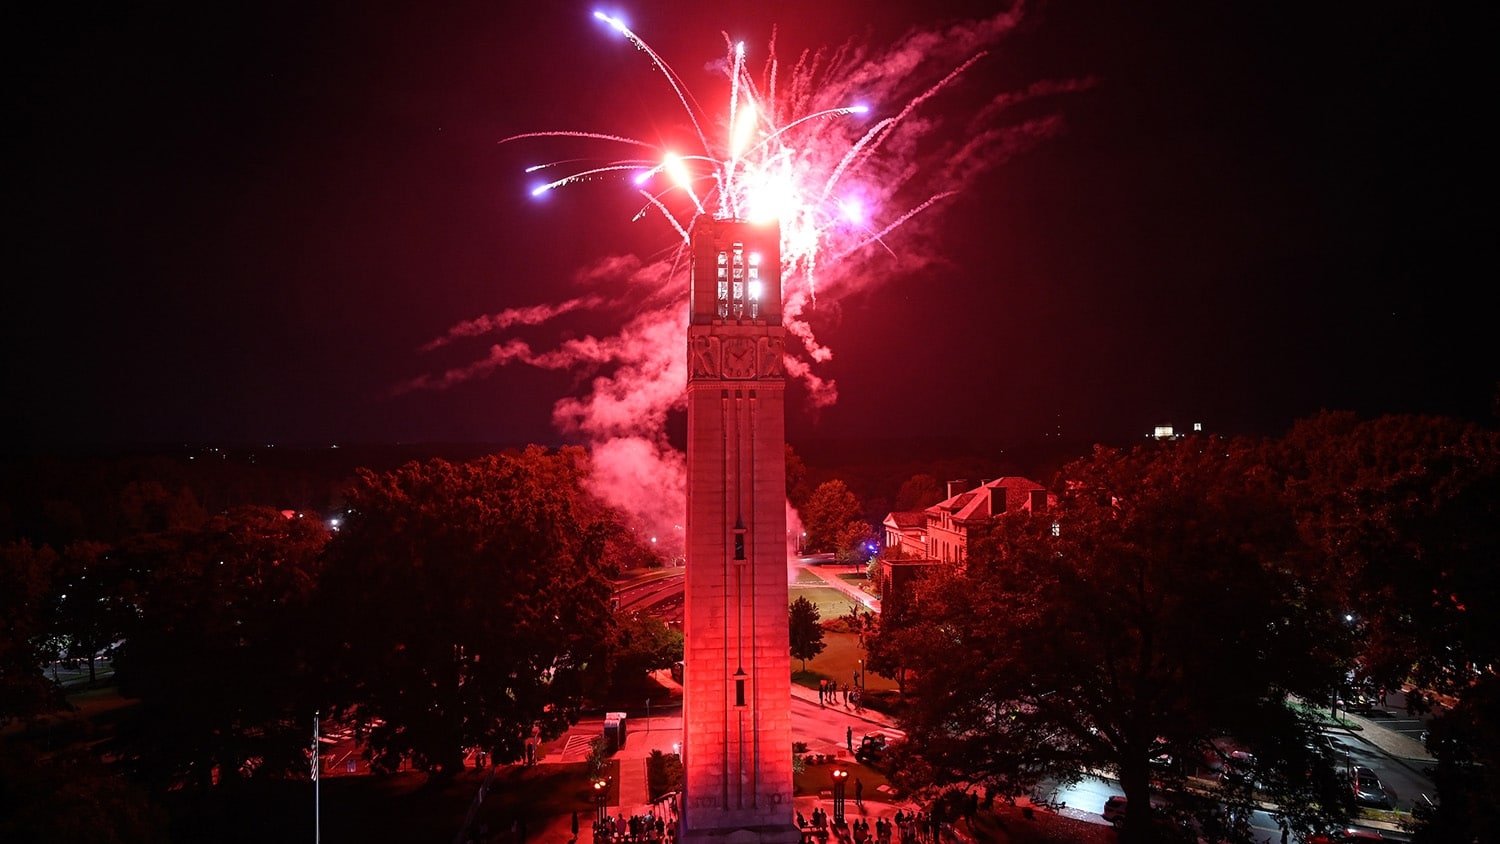 Red fireworks light up the sky above the Belltower as an explosive end to Packapalooza 2022.